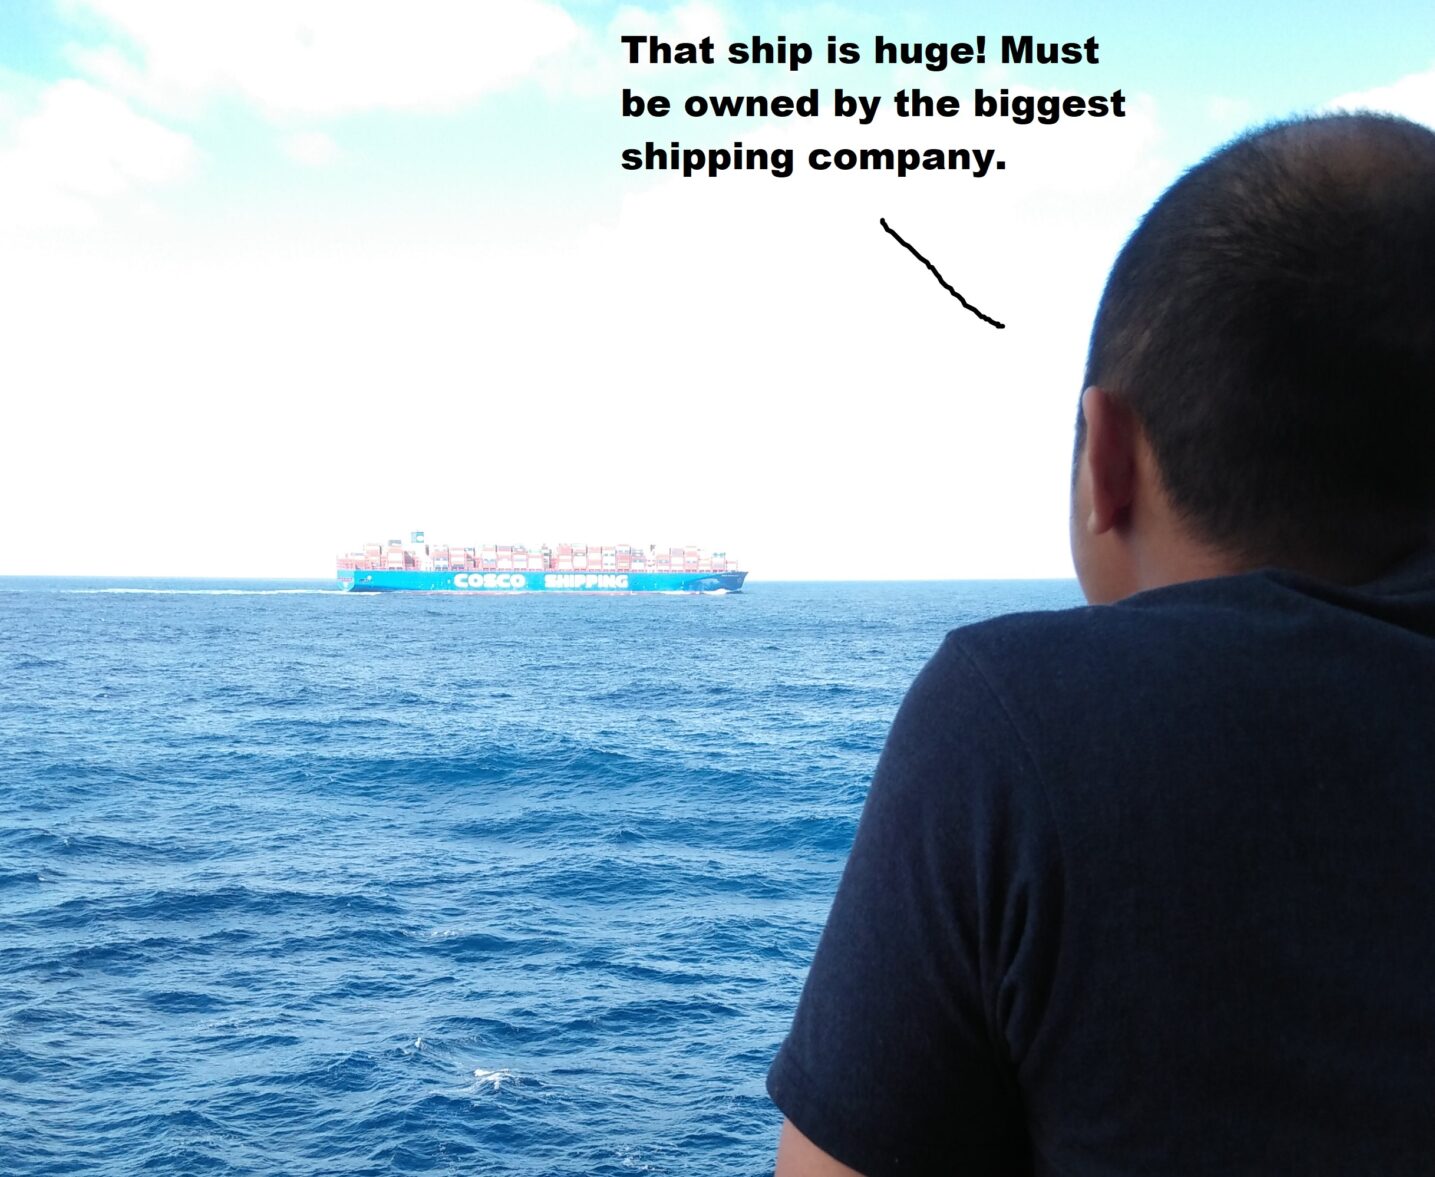 Seaman Thinking about the largest shipping companies on the planet